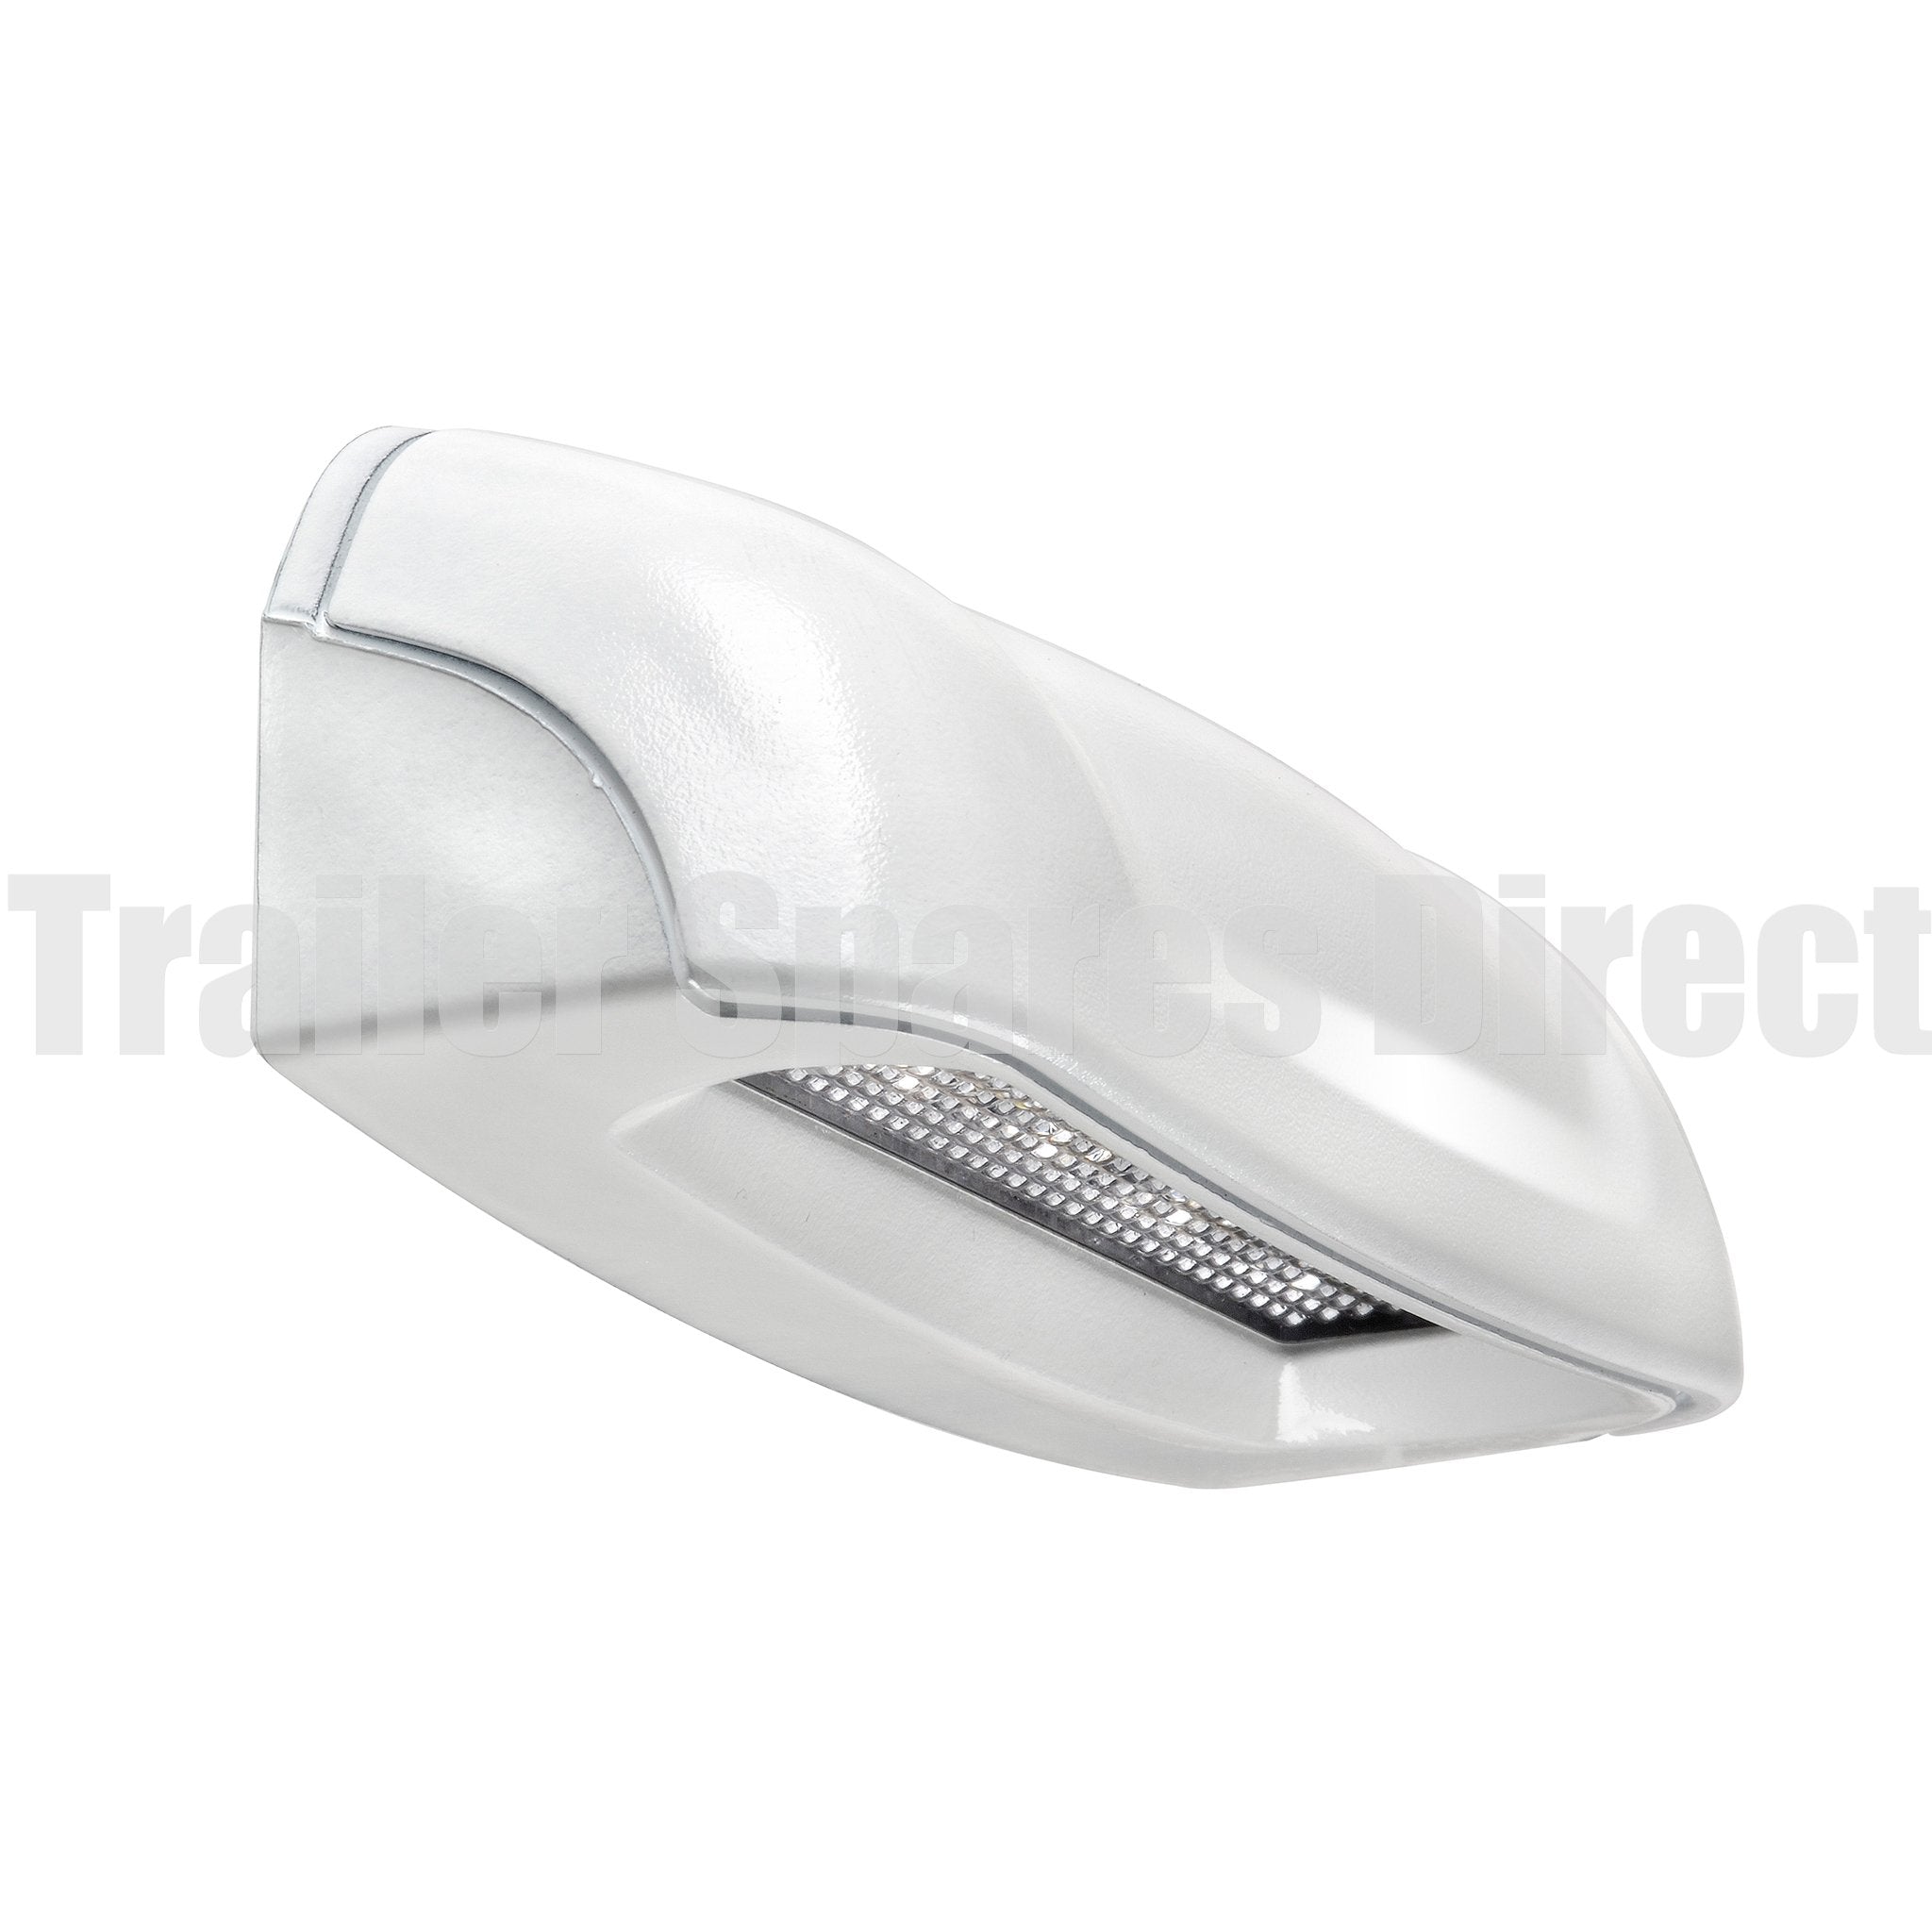 licence plate lamp white base